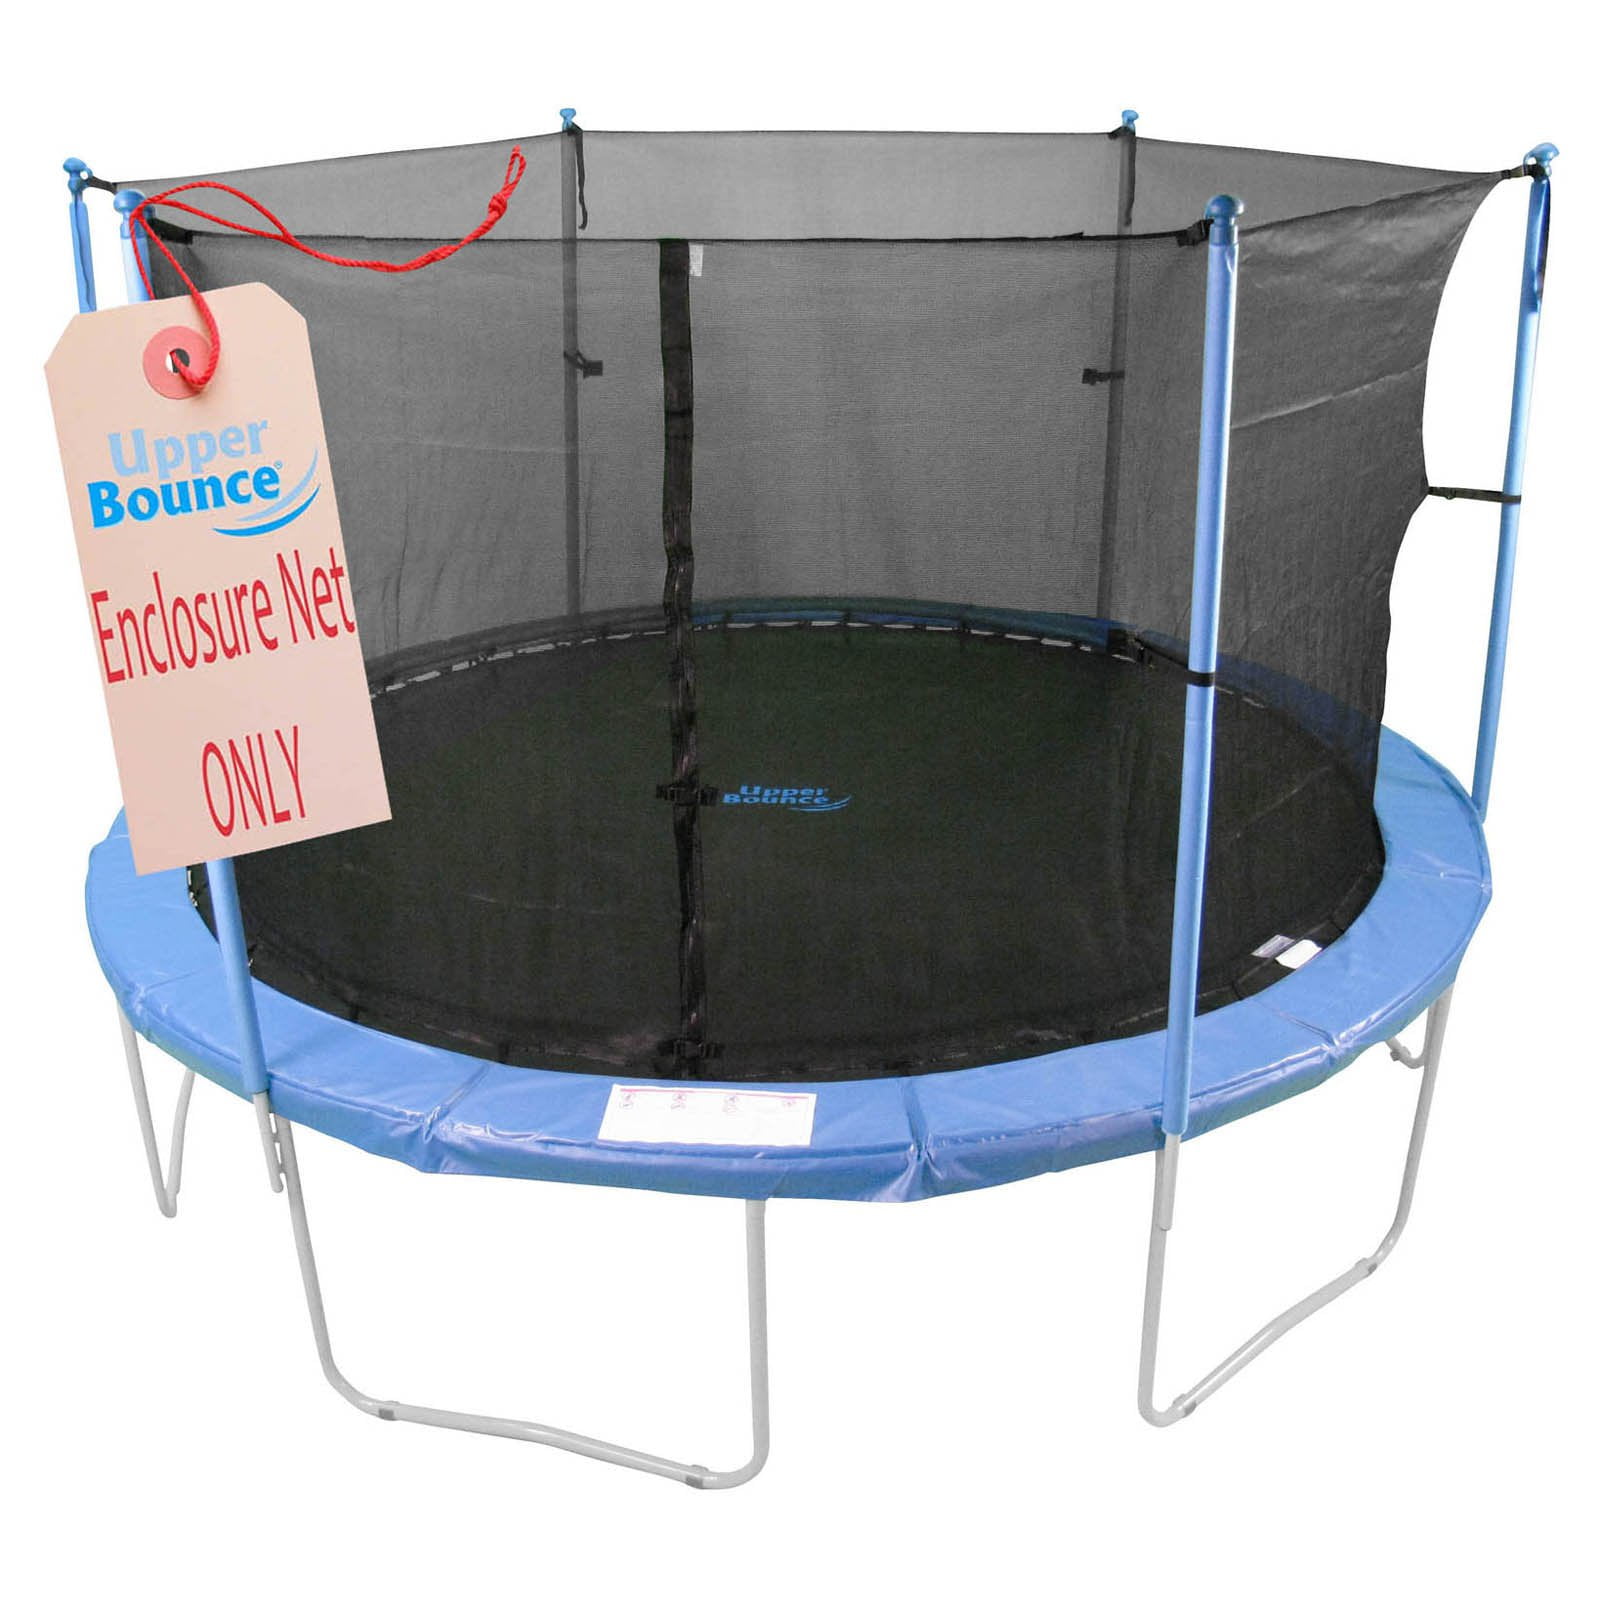 Details about   FT-3801 Trampoline Enclosure Mesh Net ONLY for the Sportspower 88" Tiny Tott 